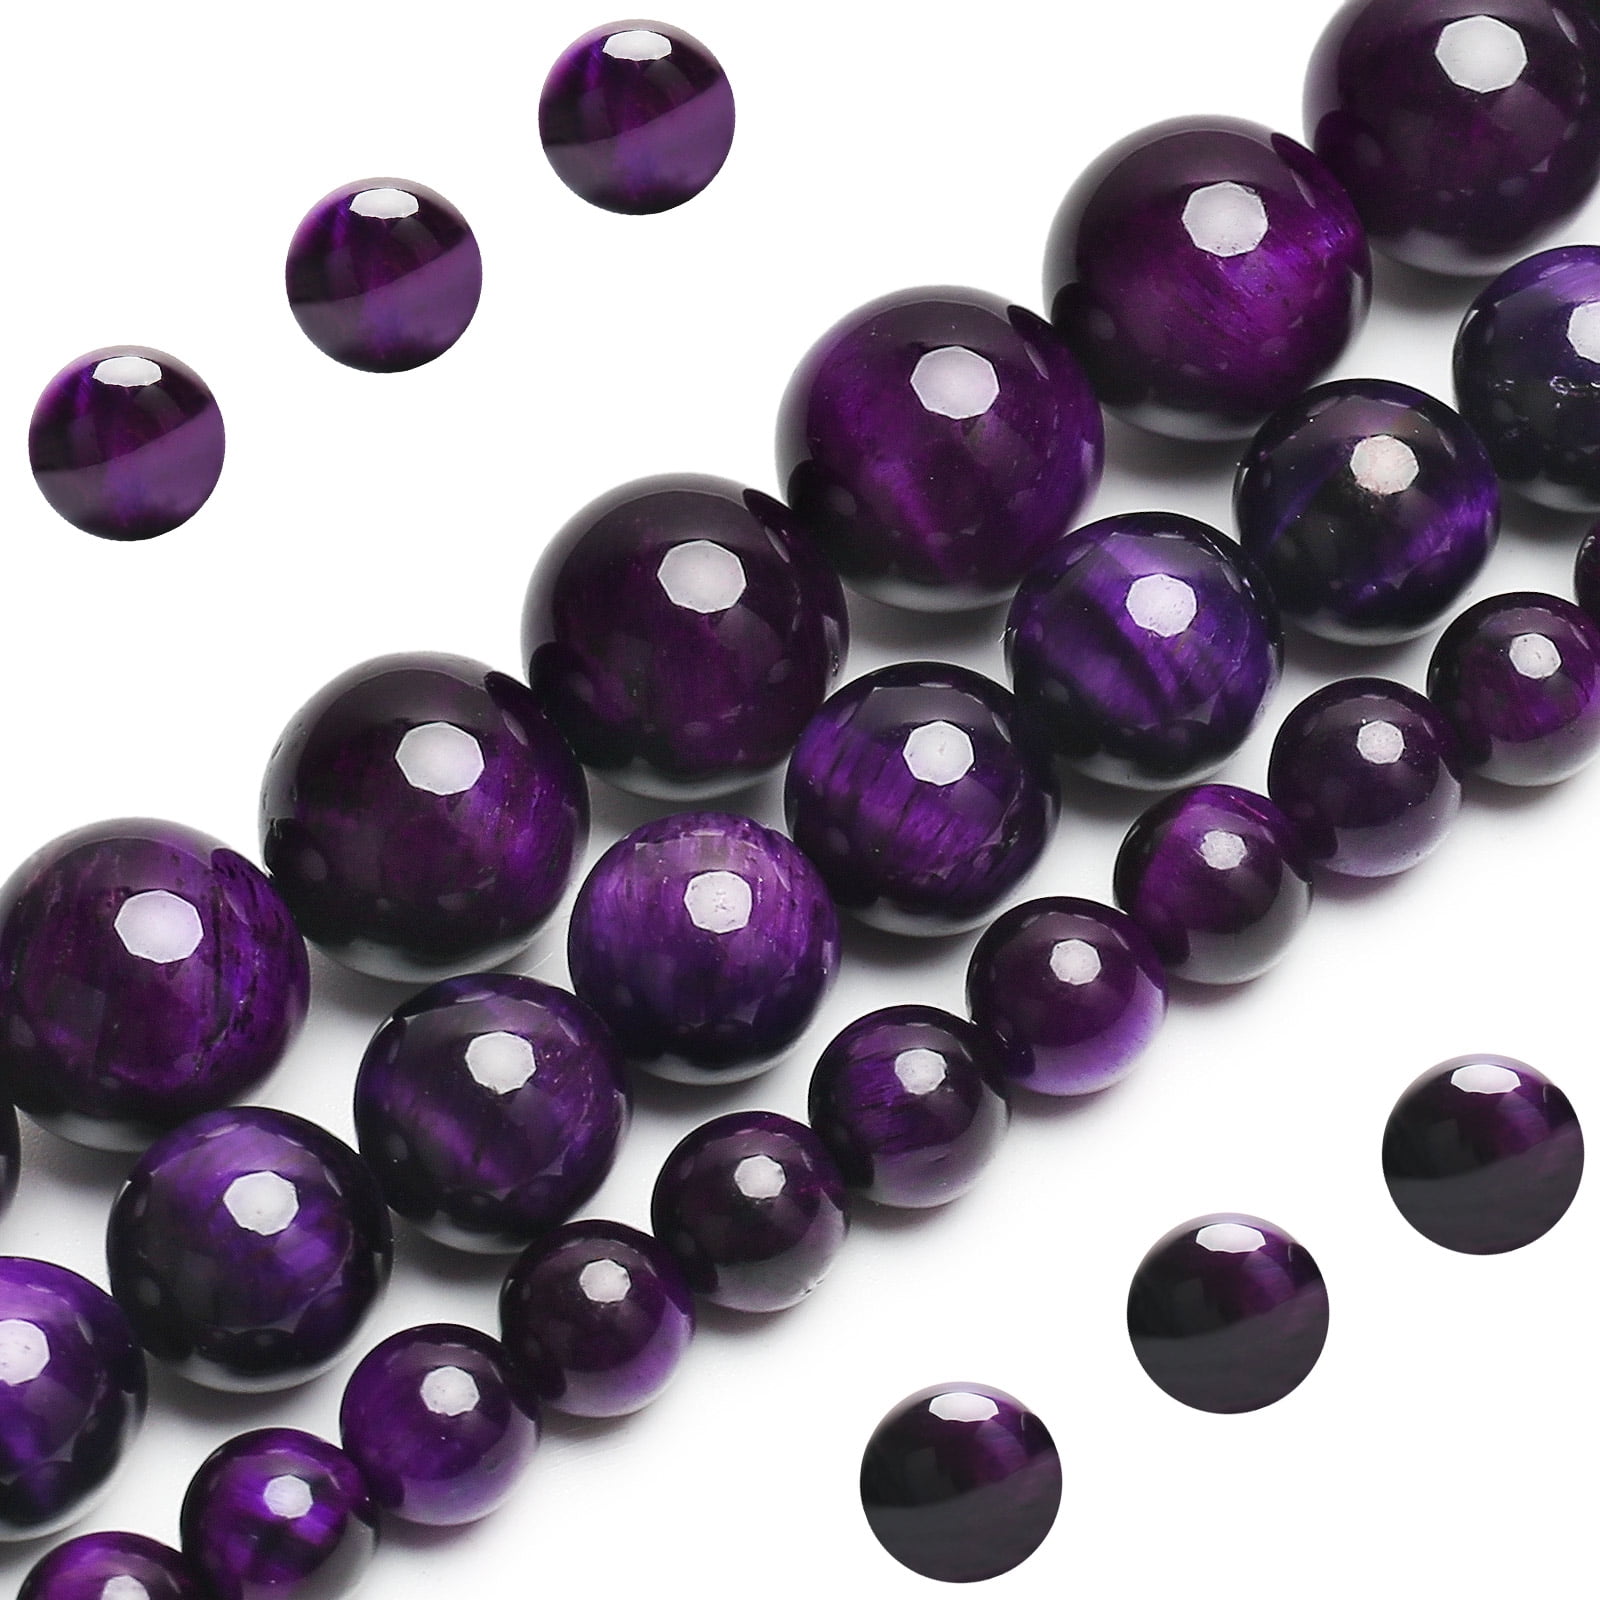 6MM Genuine Natural Lavender Amethyst Beads Grade AAA Round Loose Beads 7.5" 